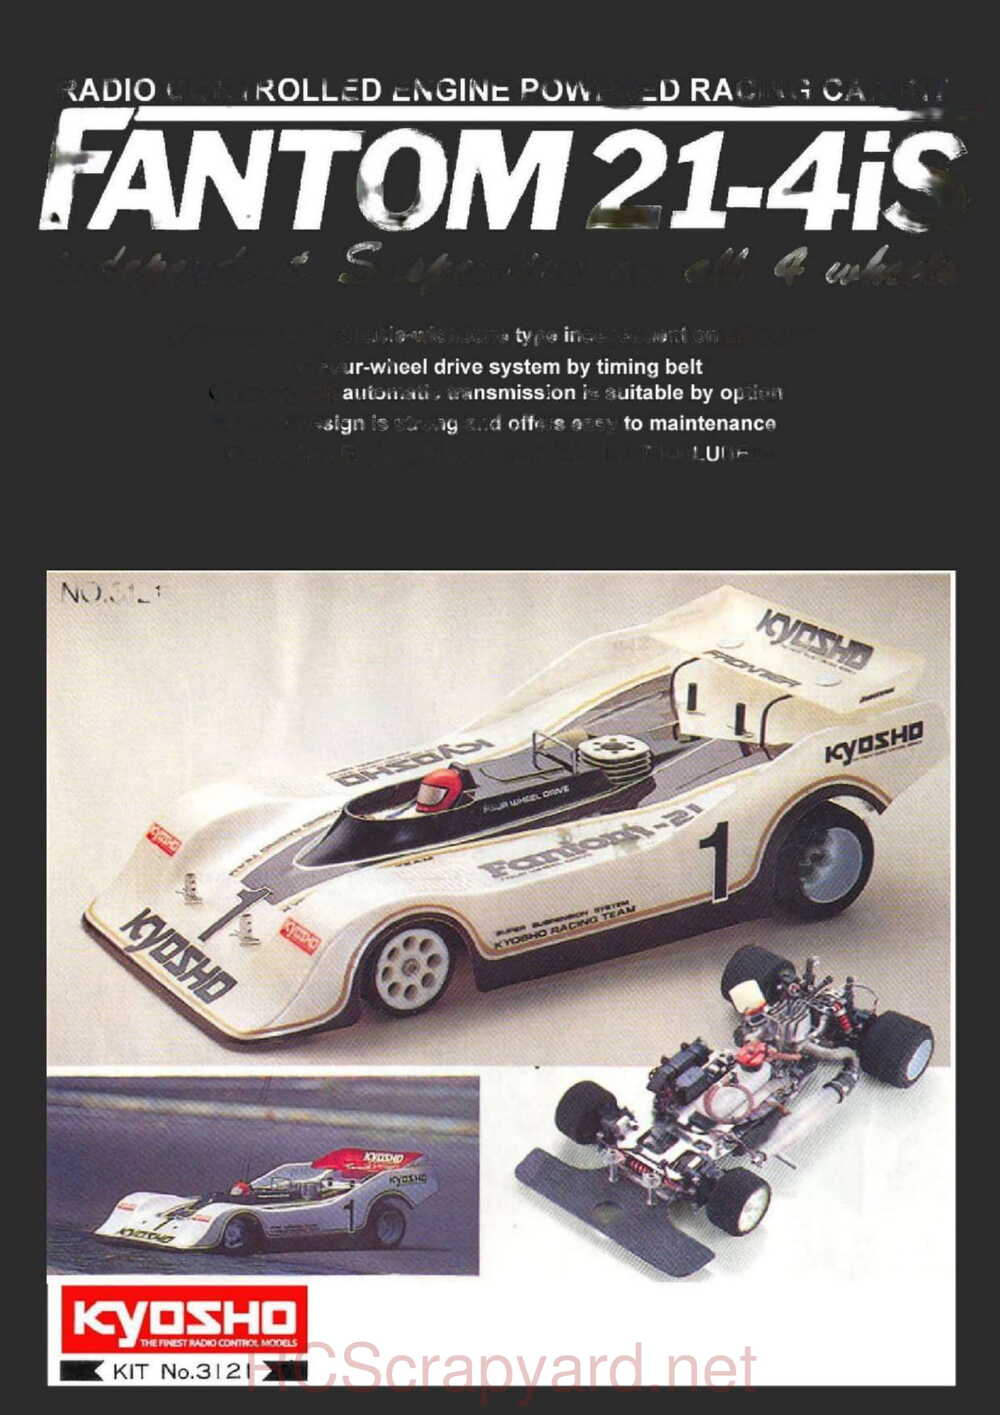 Kyosho - 3121 - Fantom-21 4iS - Manual - Page 01